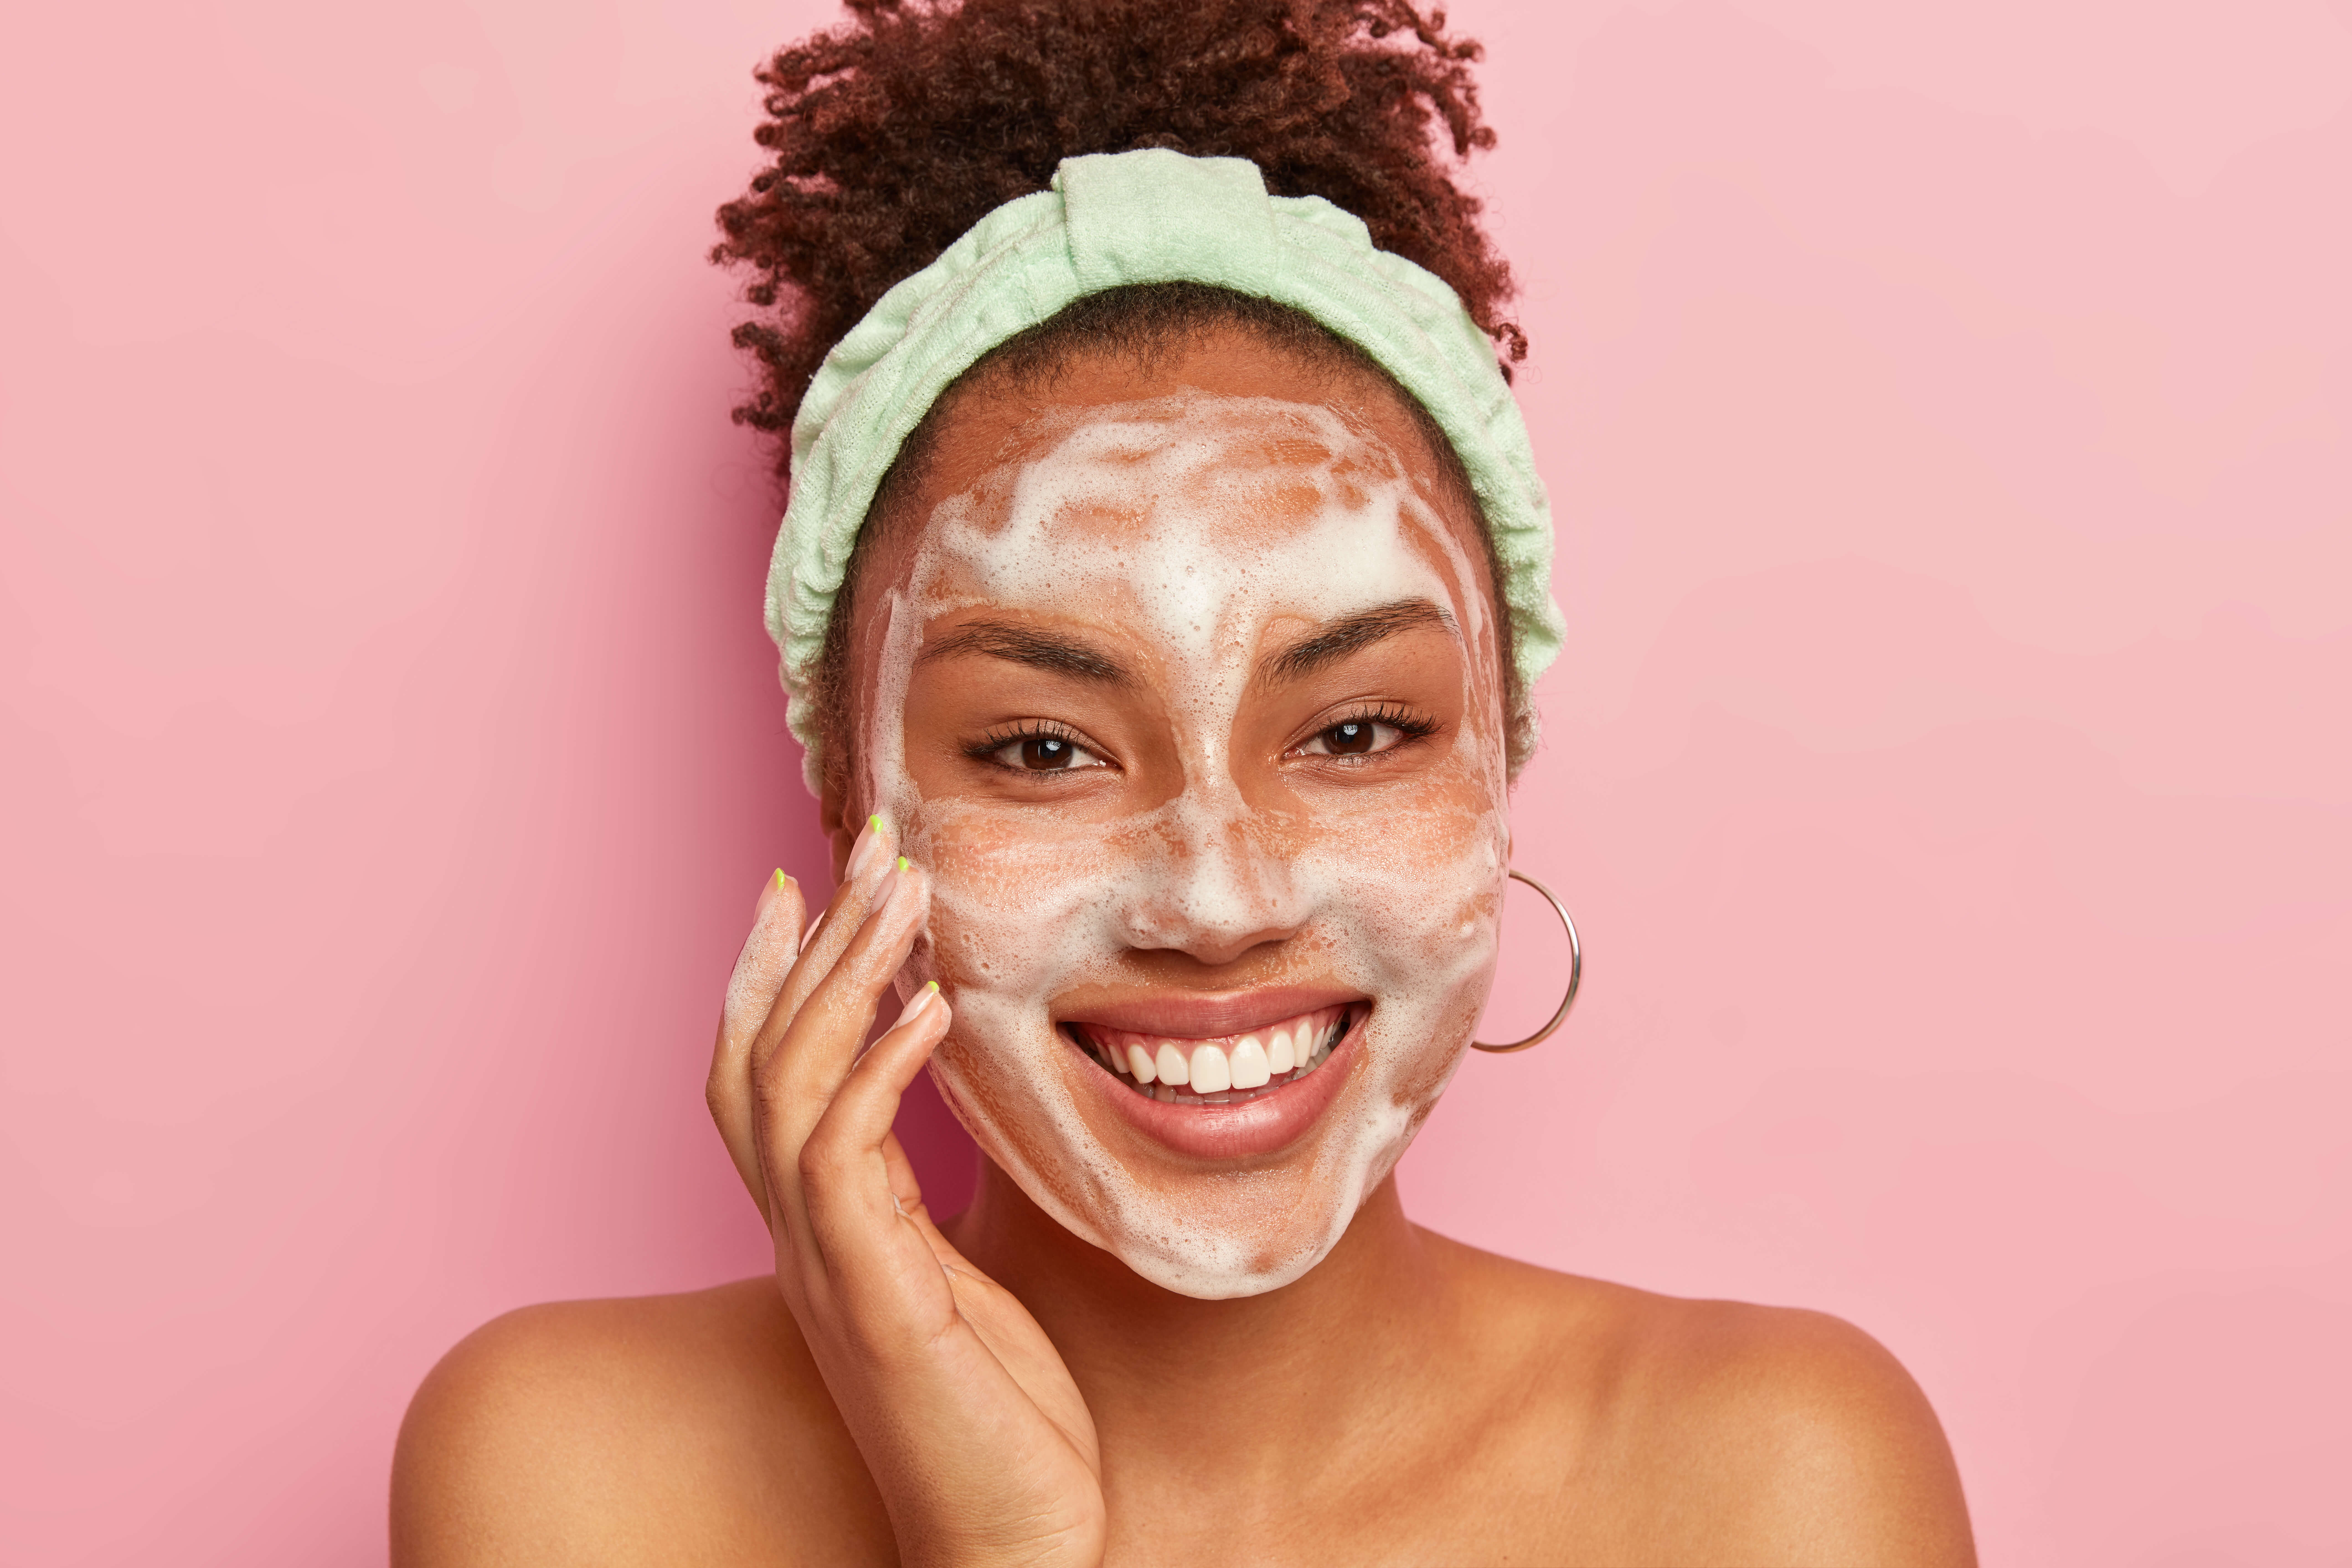 The Ultimate Guide to Skincare Tips and Tricks for a Clear, Glowing Complexion